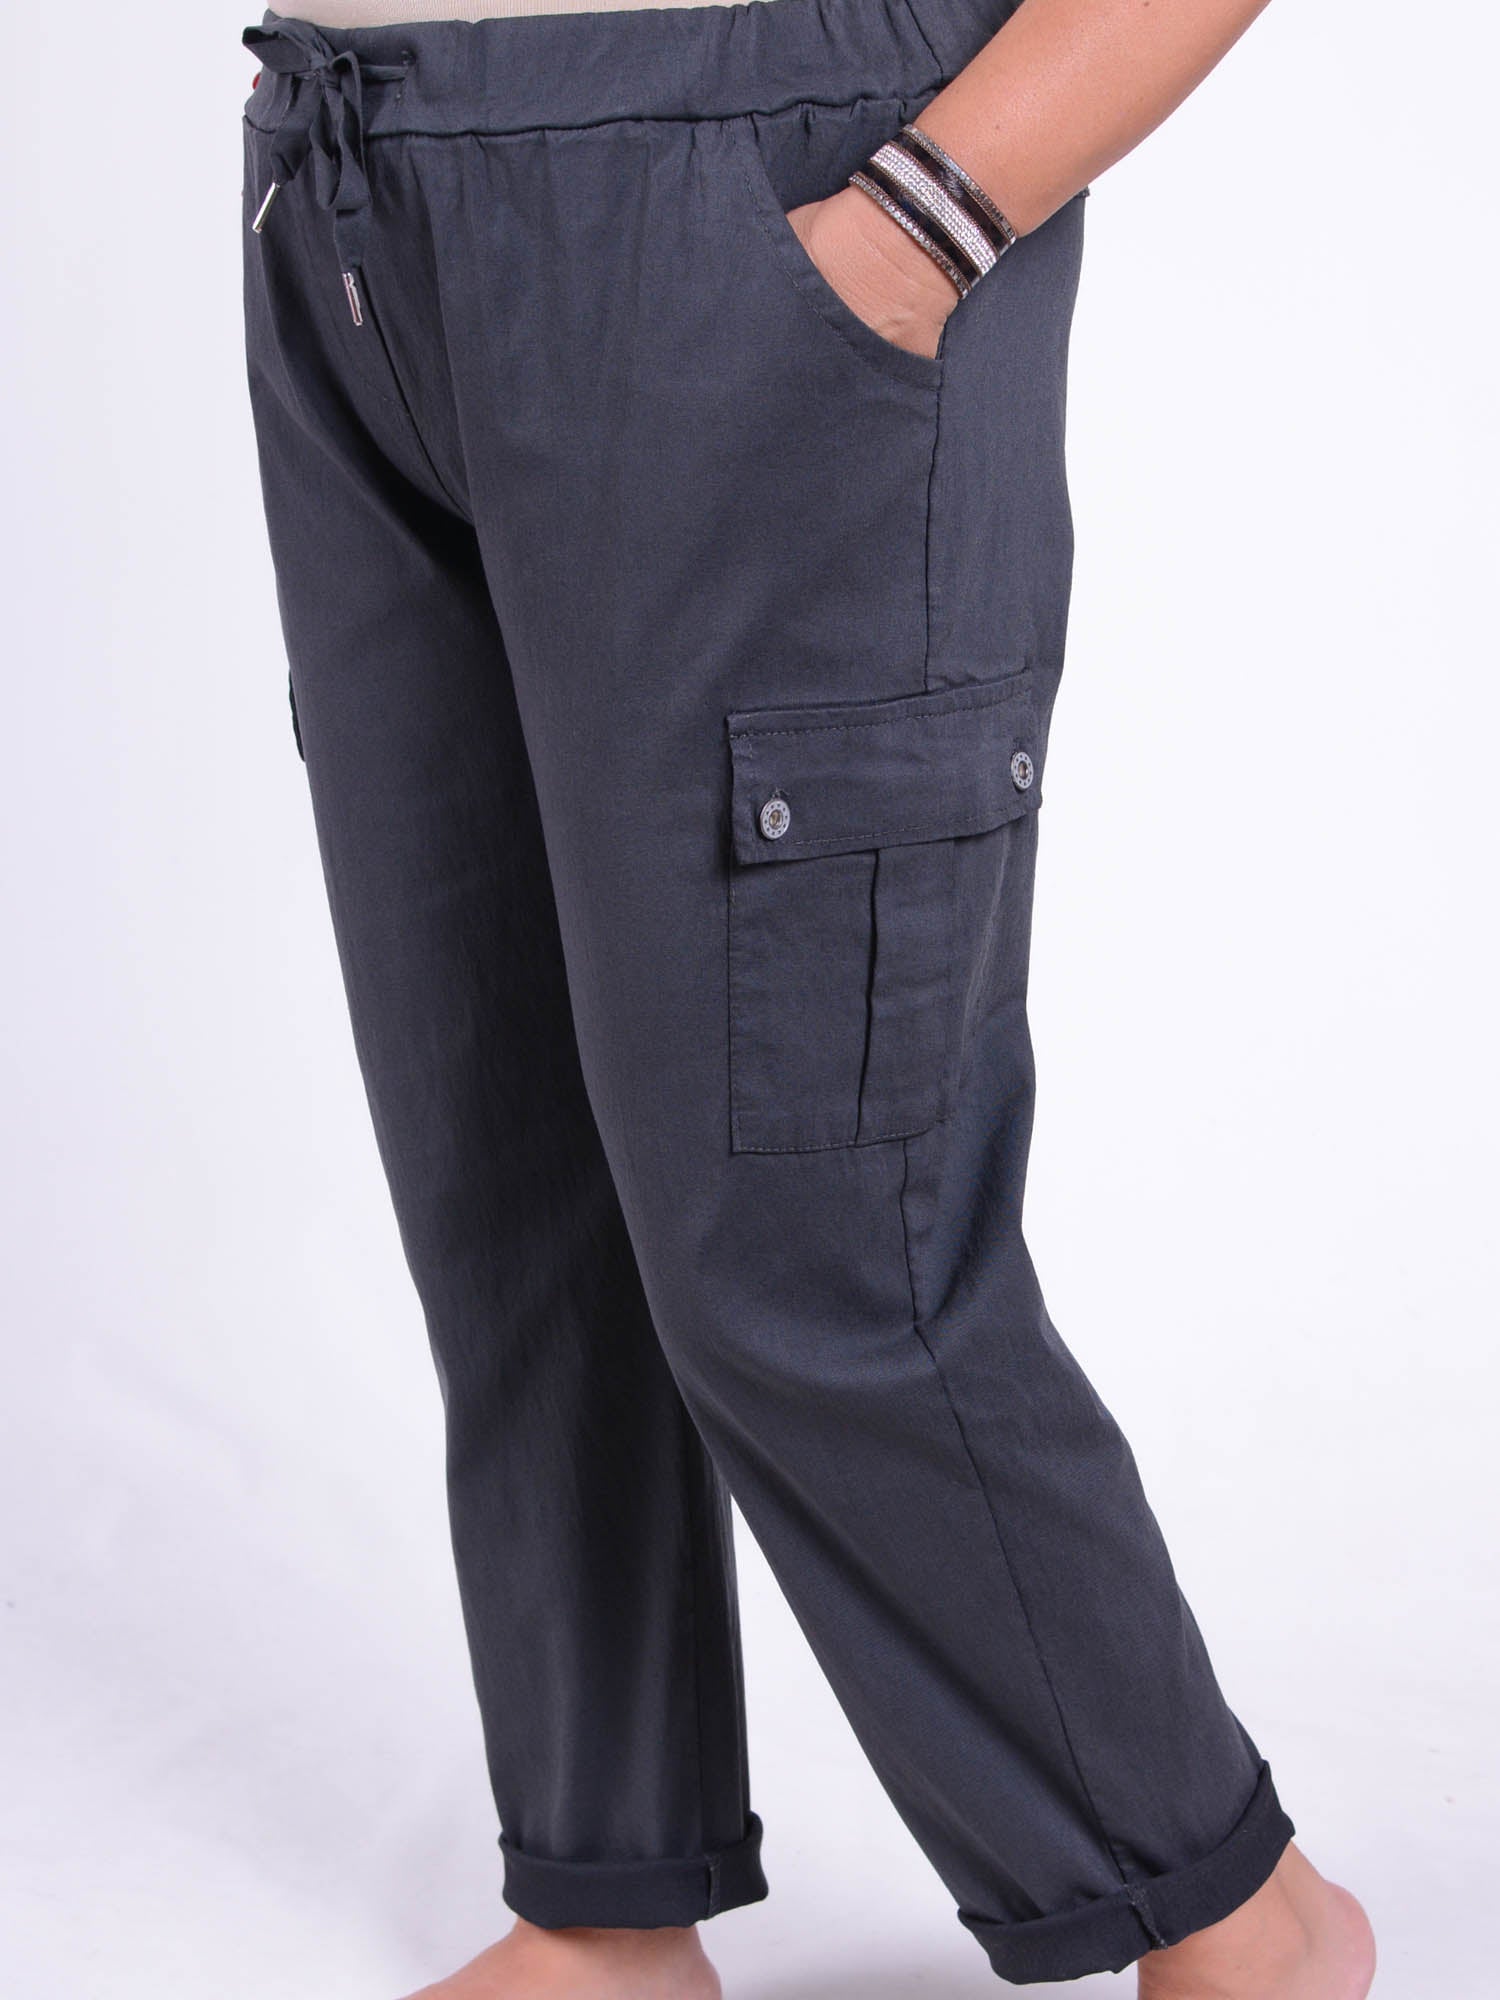 Magic Cargo Trousers - 10642, Trousers, Pure Plus Clothing, Lagenlook Clothing, Plus Size Fashion, Over 50 Fashion